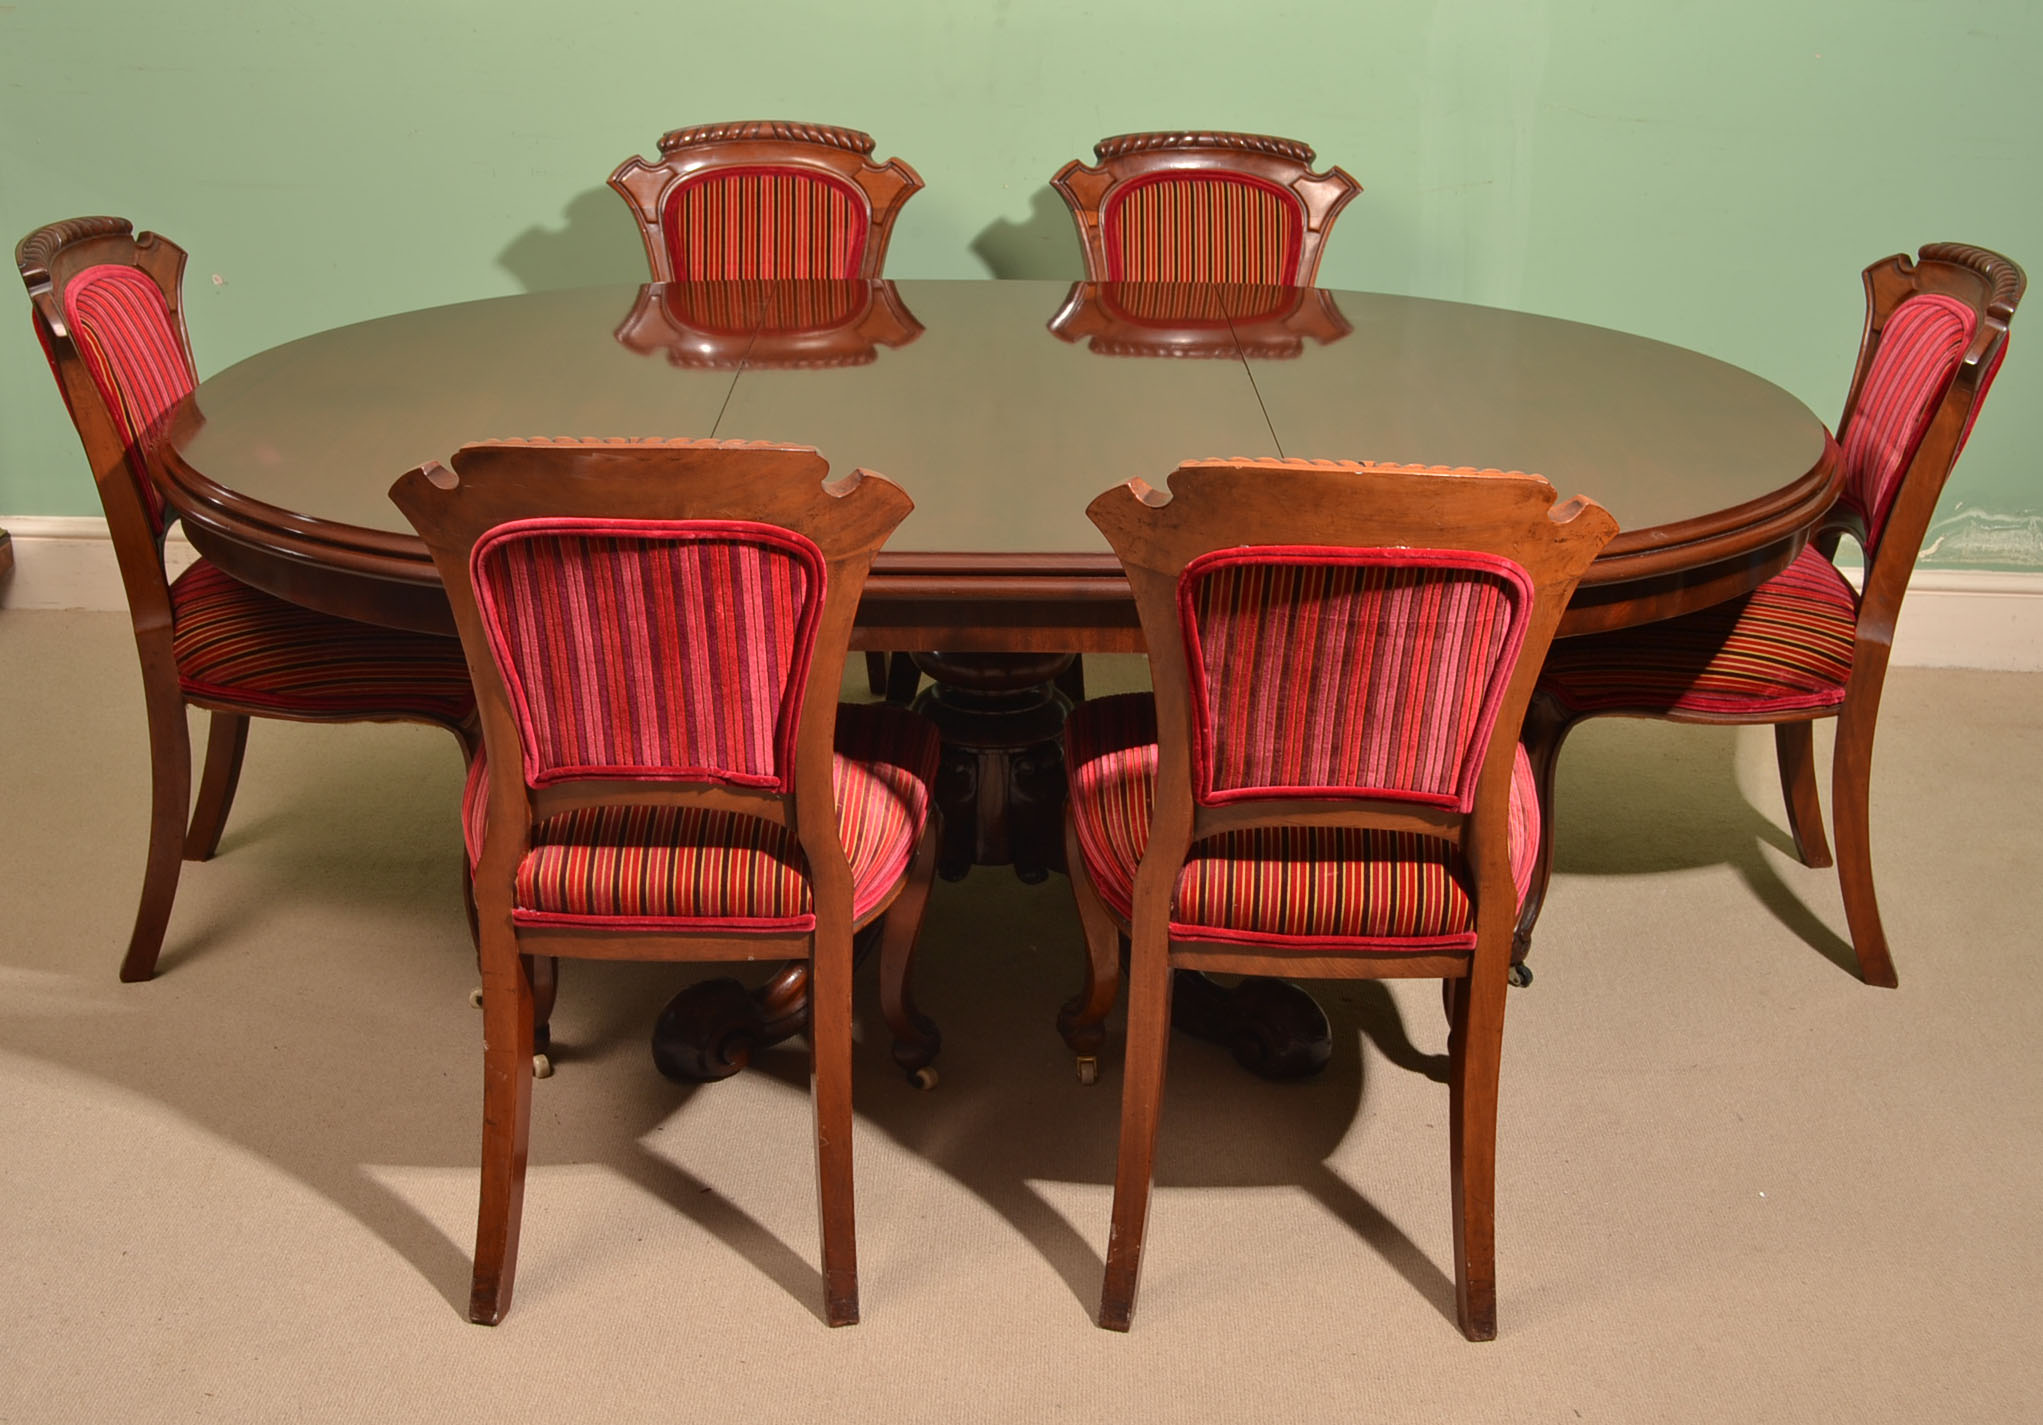 Regent Antiques - Dining tables and chairs - Table and chair sets